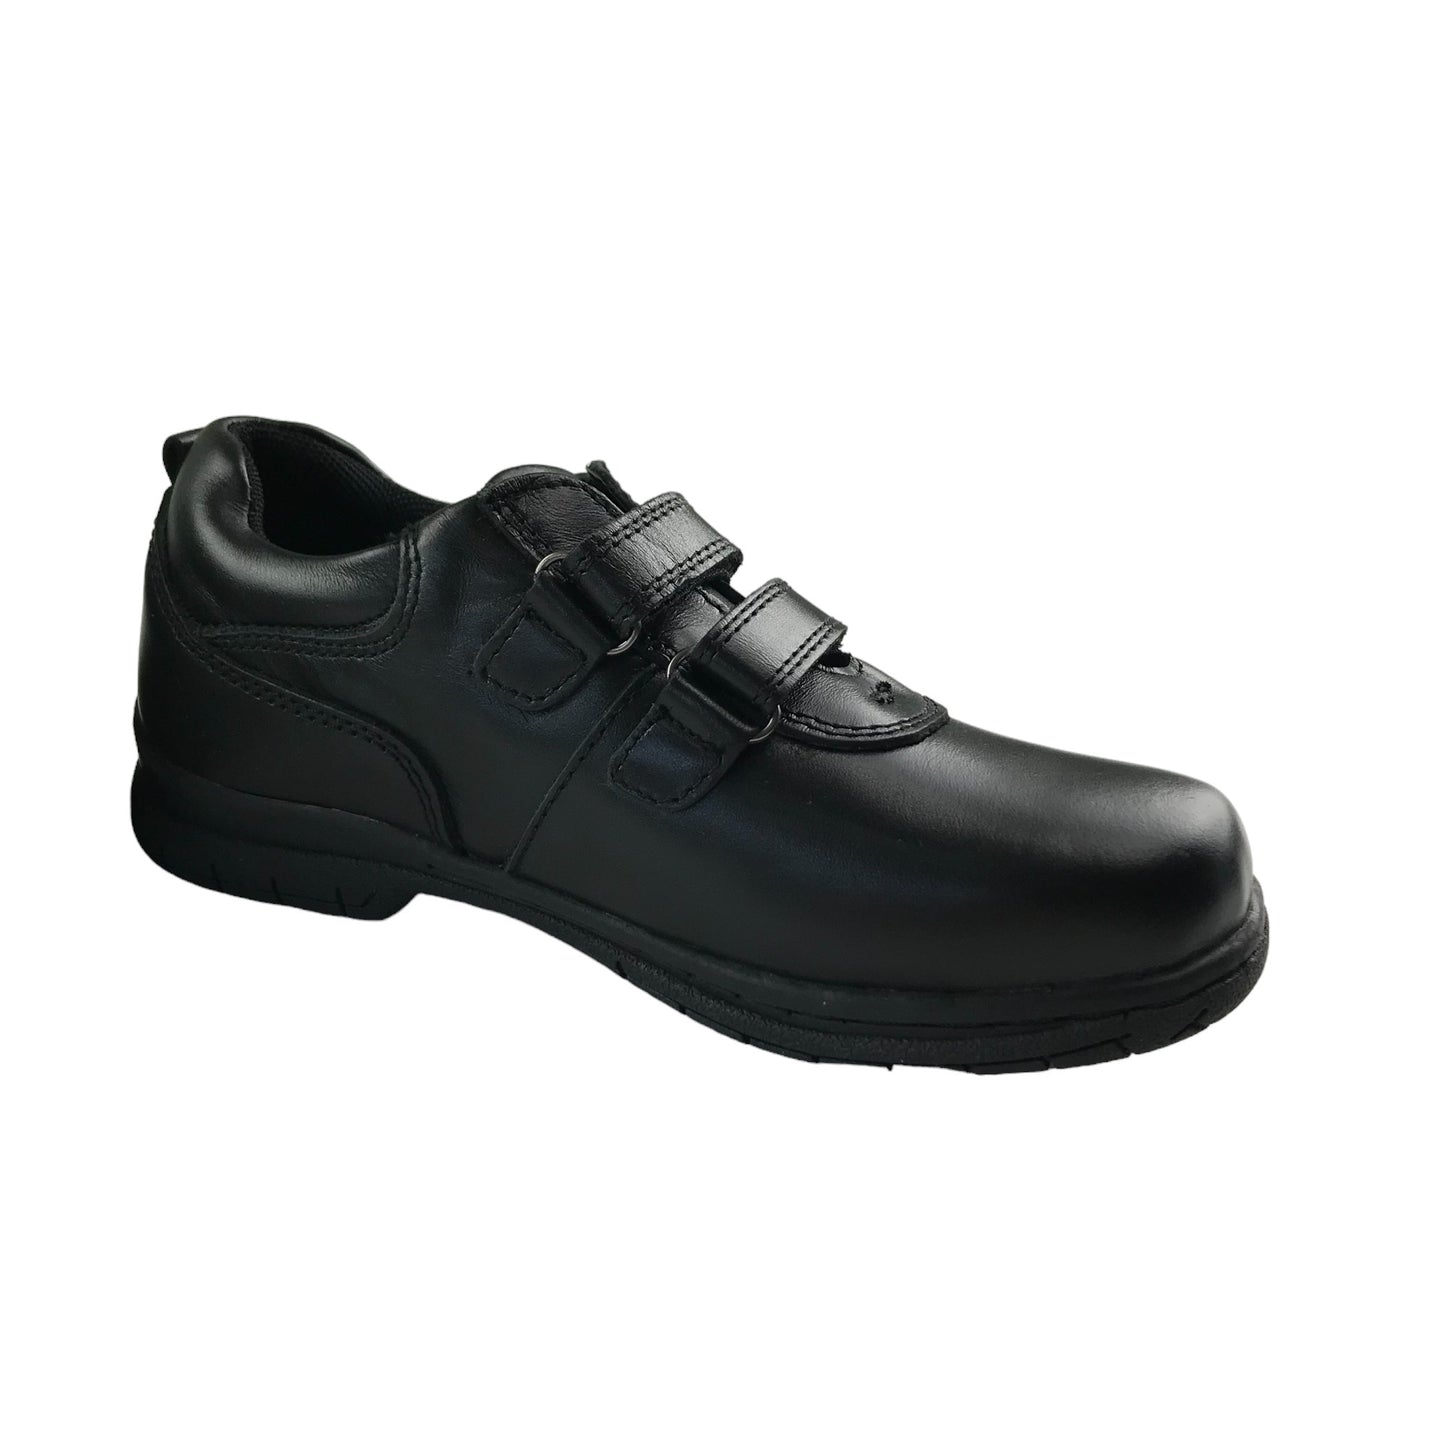 Kangol School Shoes Shoe Size 1 Black Leather with Straps